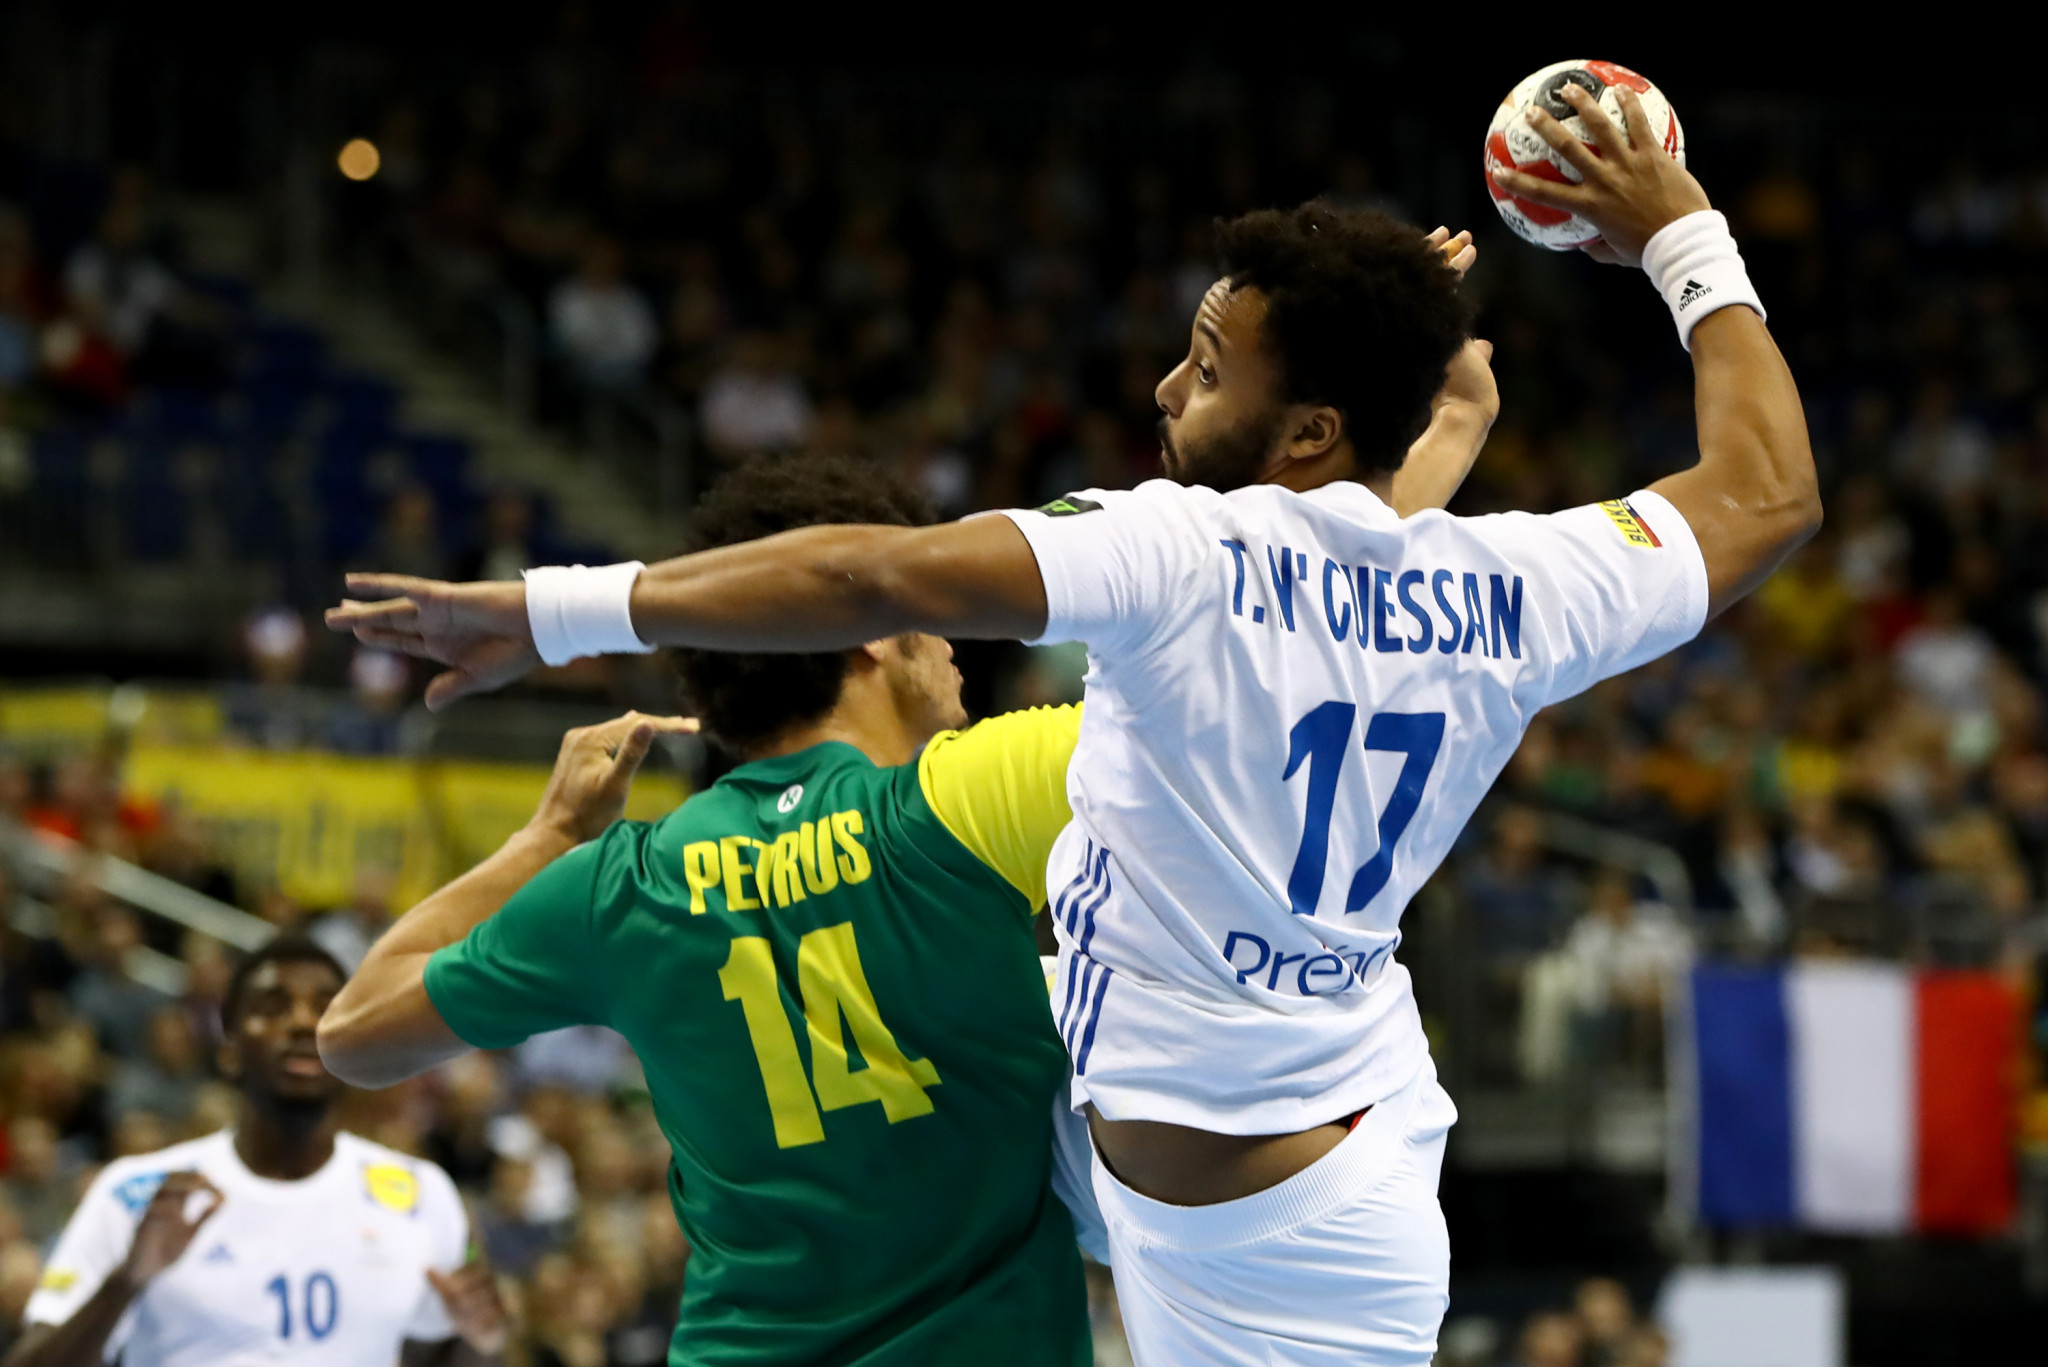 Defending champions France defeated Brazil in their opening game of the IHF Men's Handball World Championship in Berlin ©Getty Images